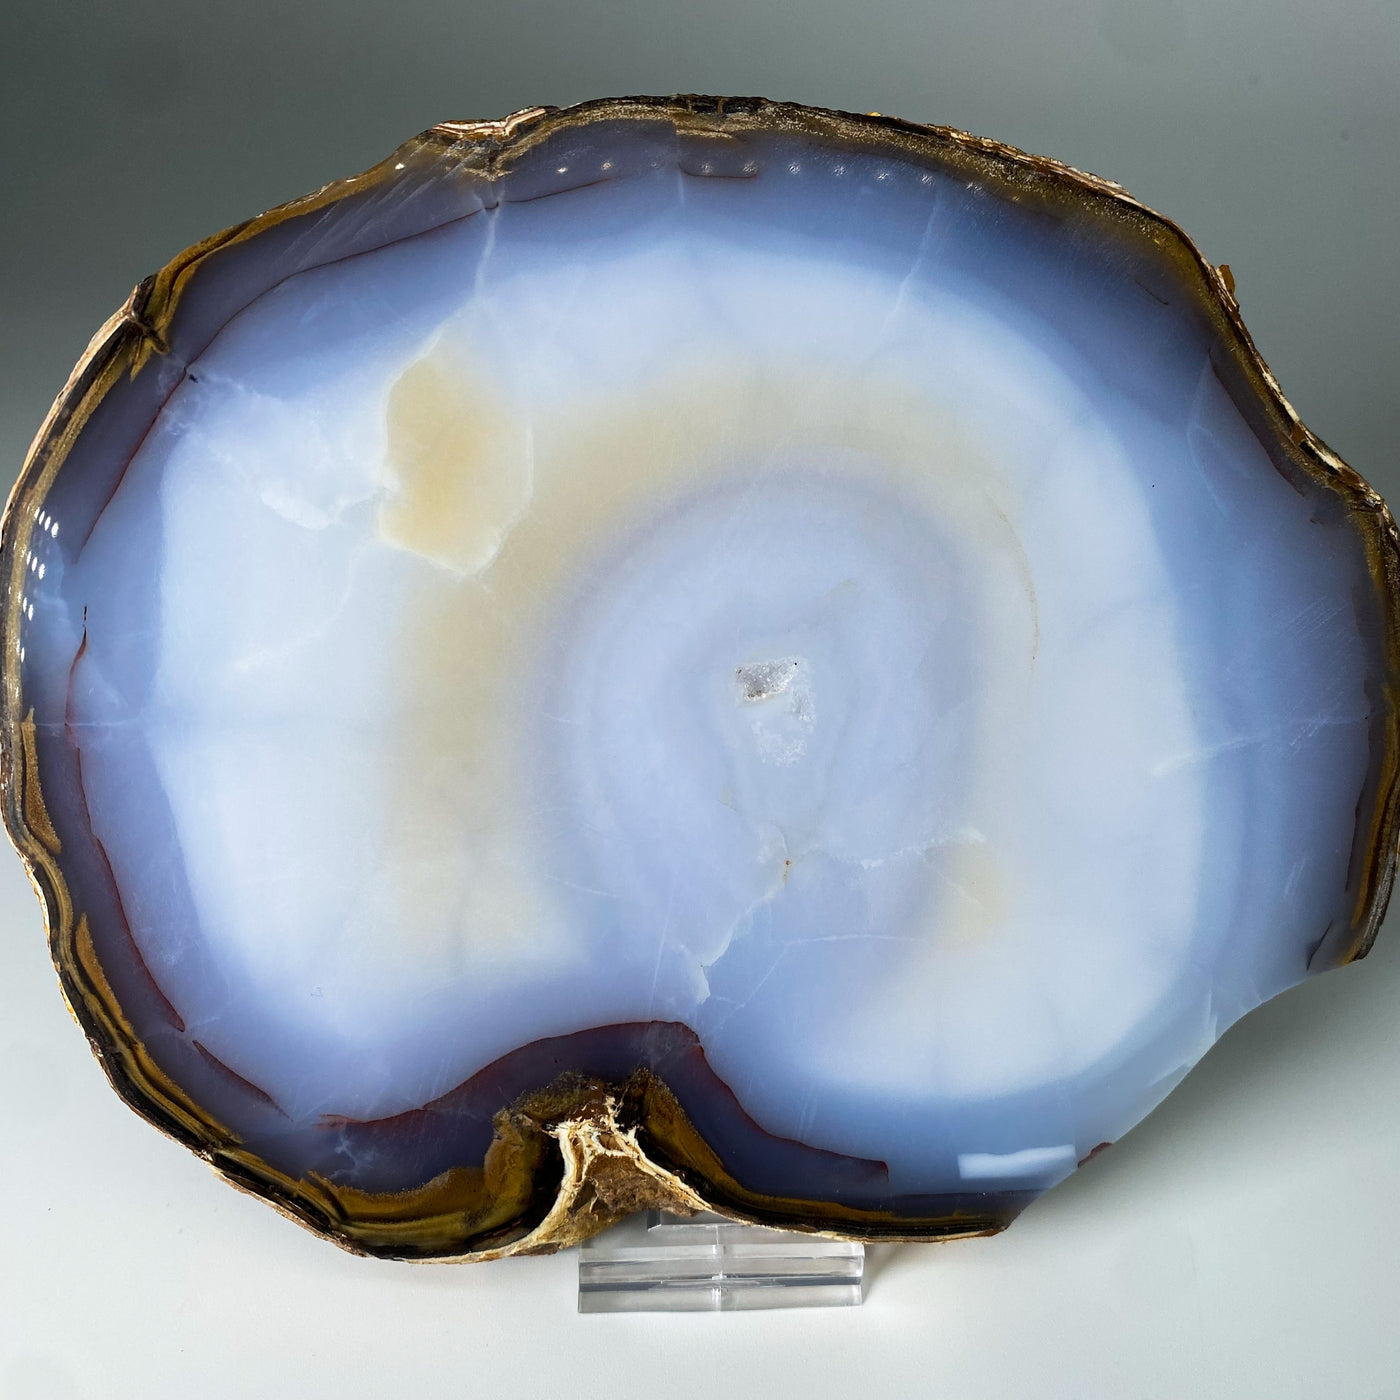 Blue Chalcedony with Hematite inclusion